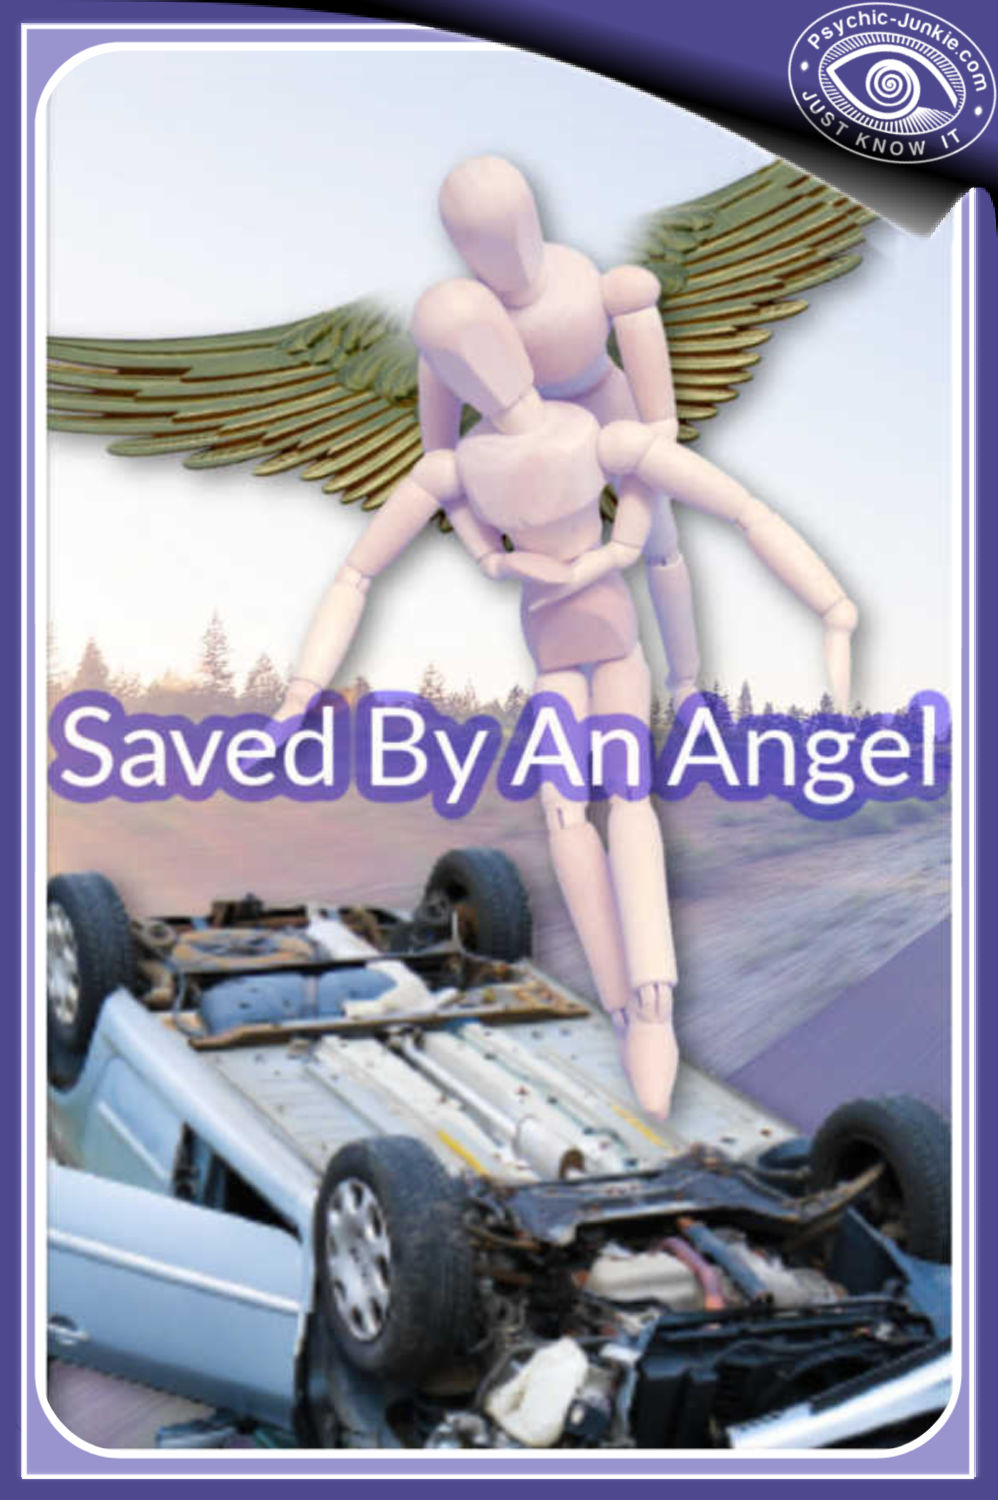 How I Was Saved By An Angel